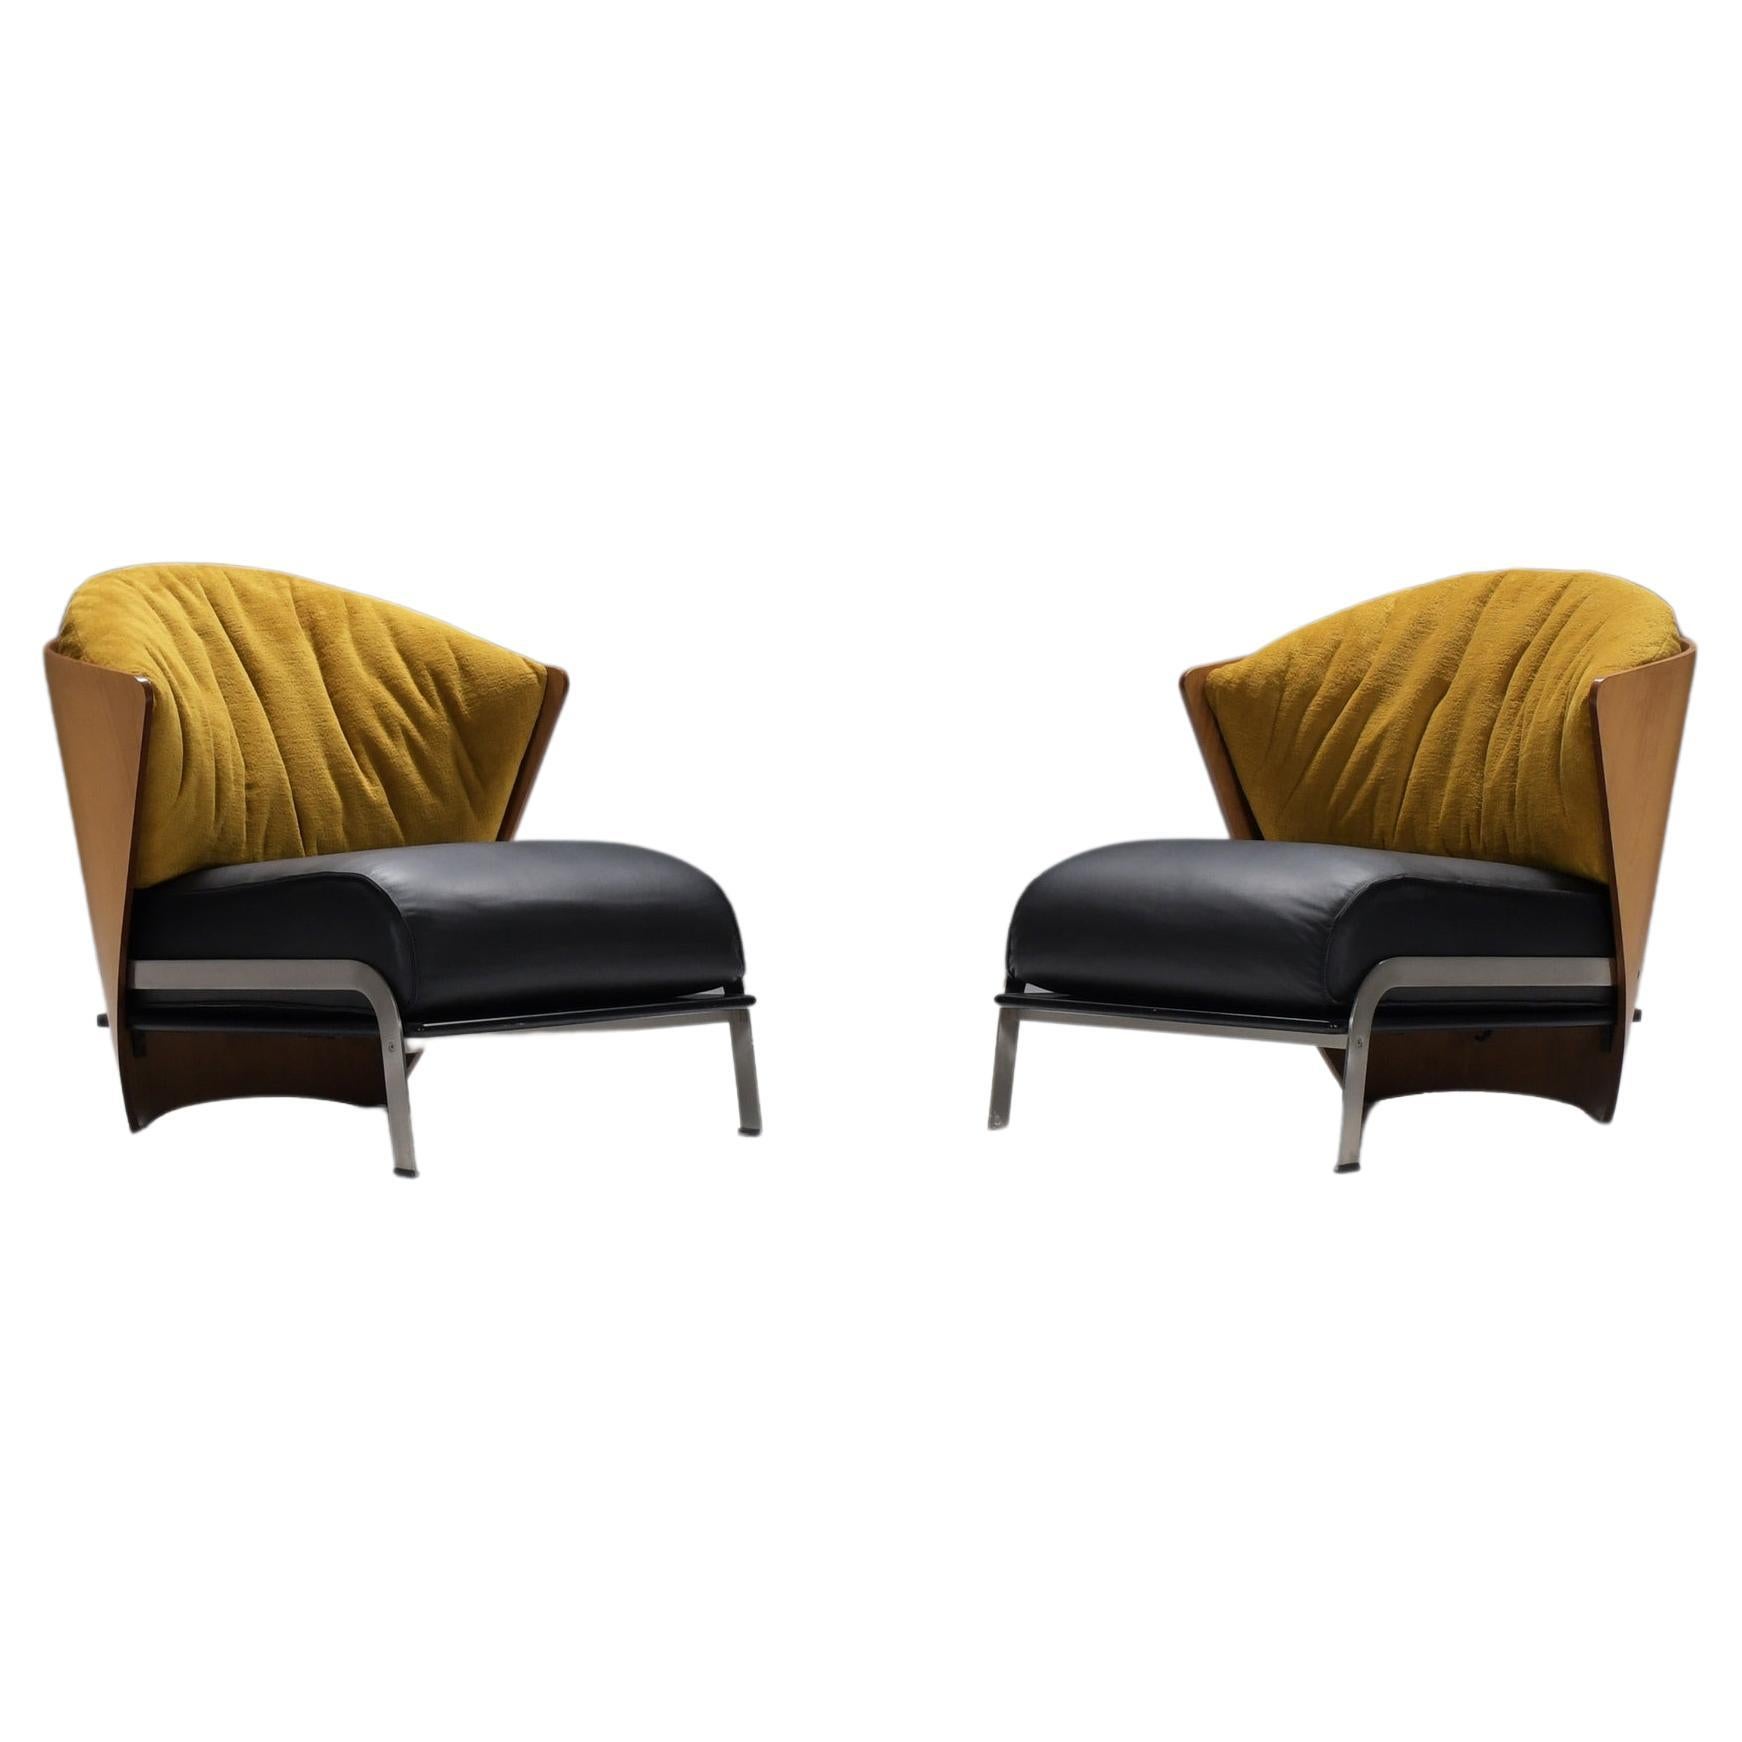 Stunning Elba chairs with mew leather & velvet by Franco Raggi for Cappellini For Sale